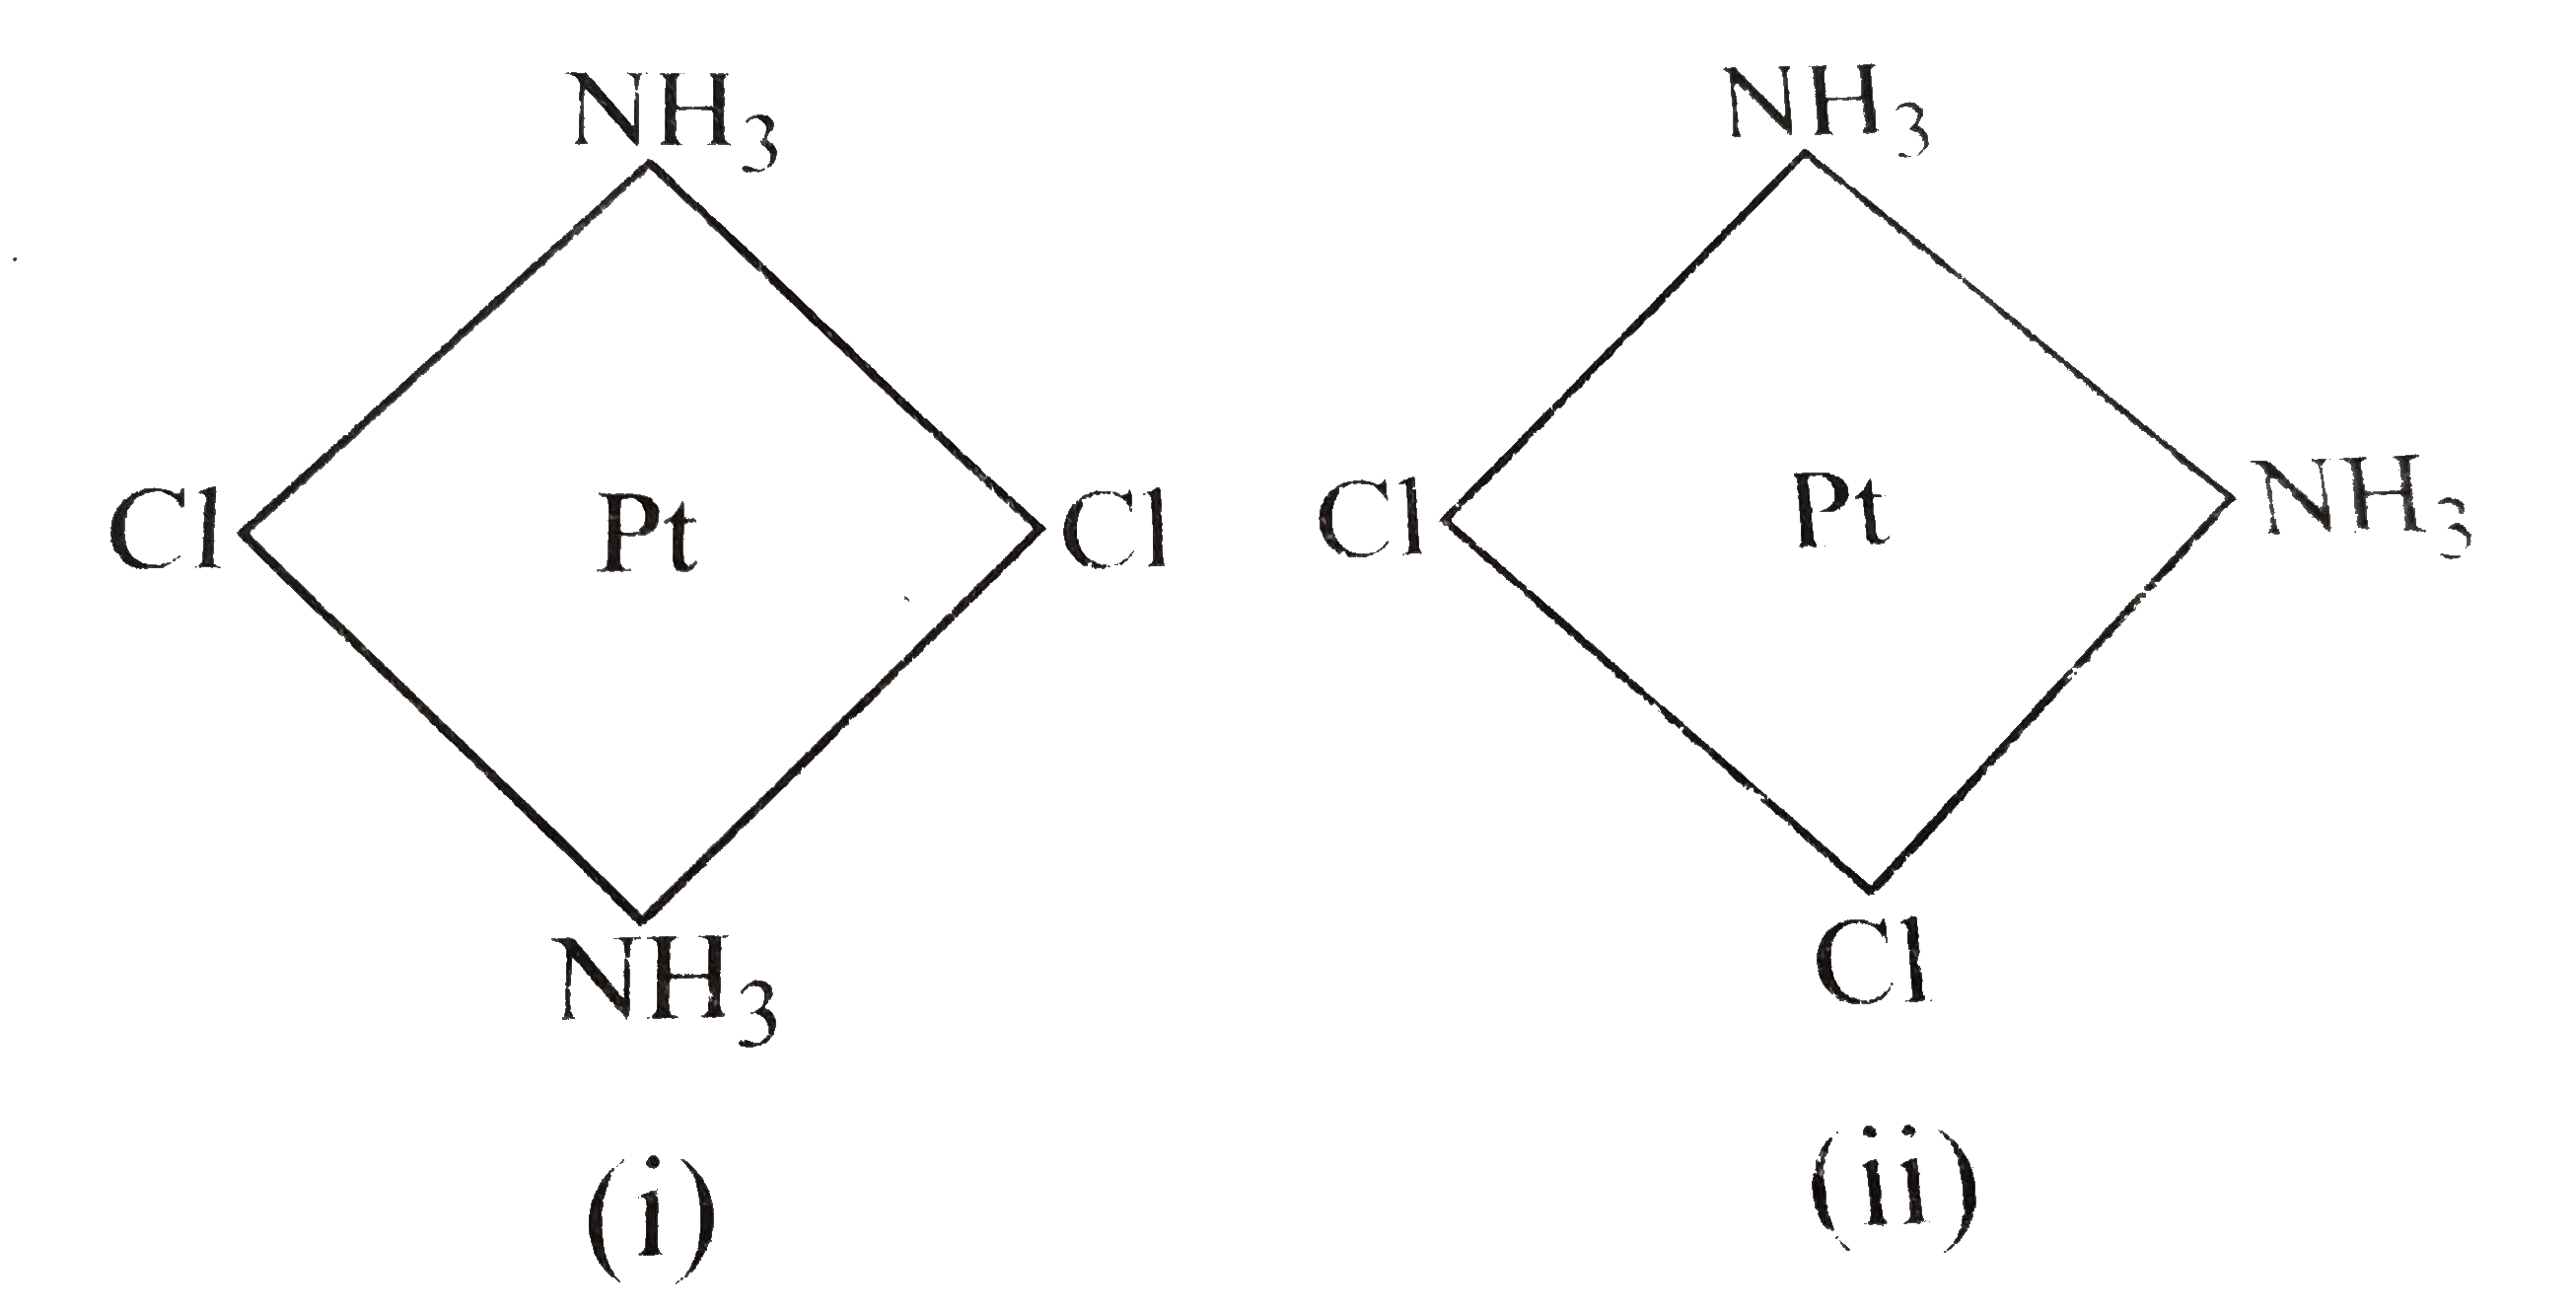 The Pt-Cl distance is 2.32 A in several crystalline compounds   What is the Cl-Cl distance in structure (i) and in structure (ii)    .